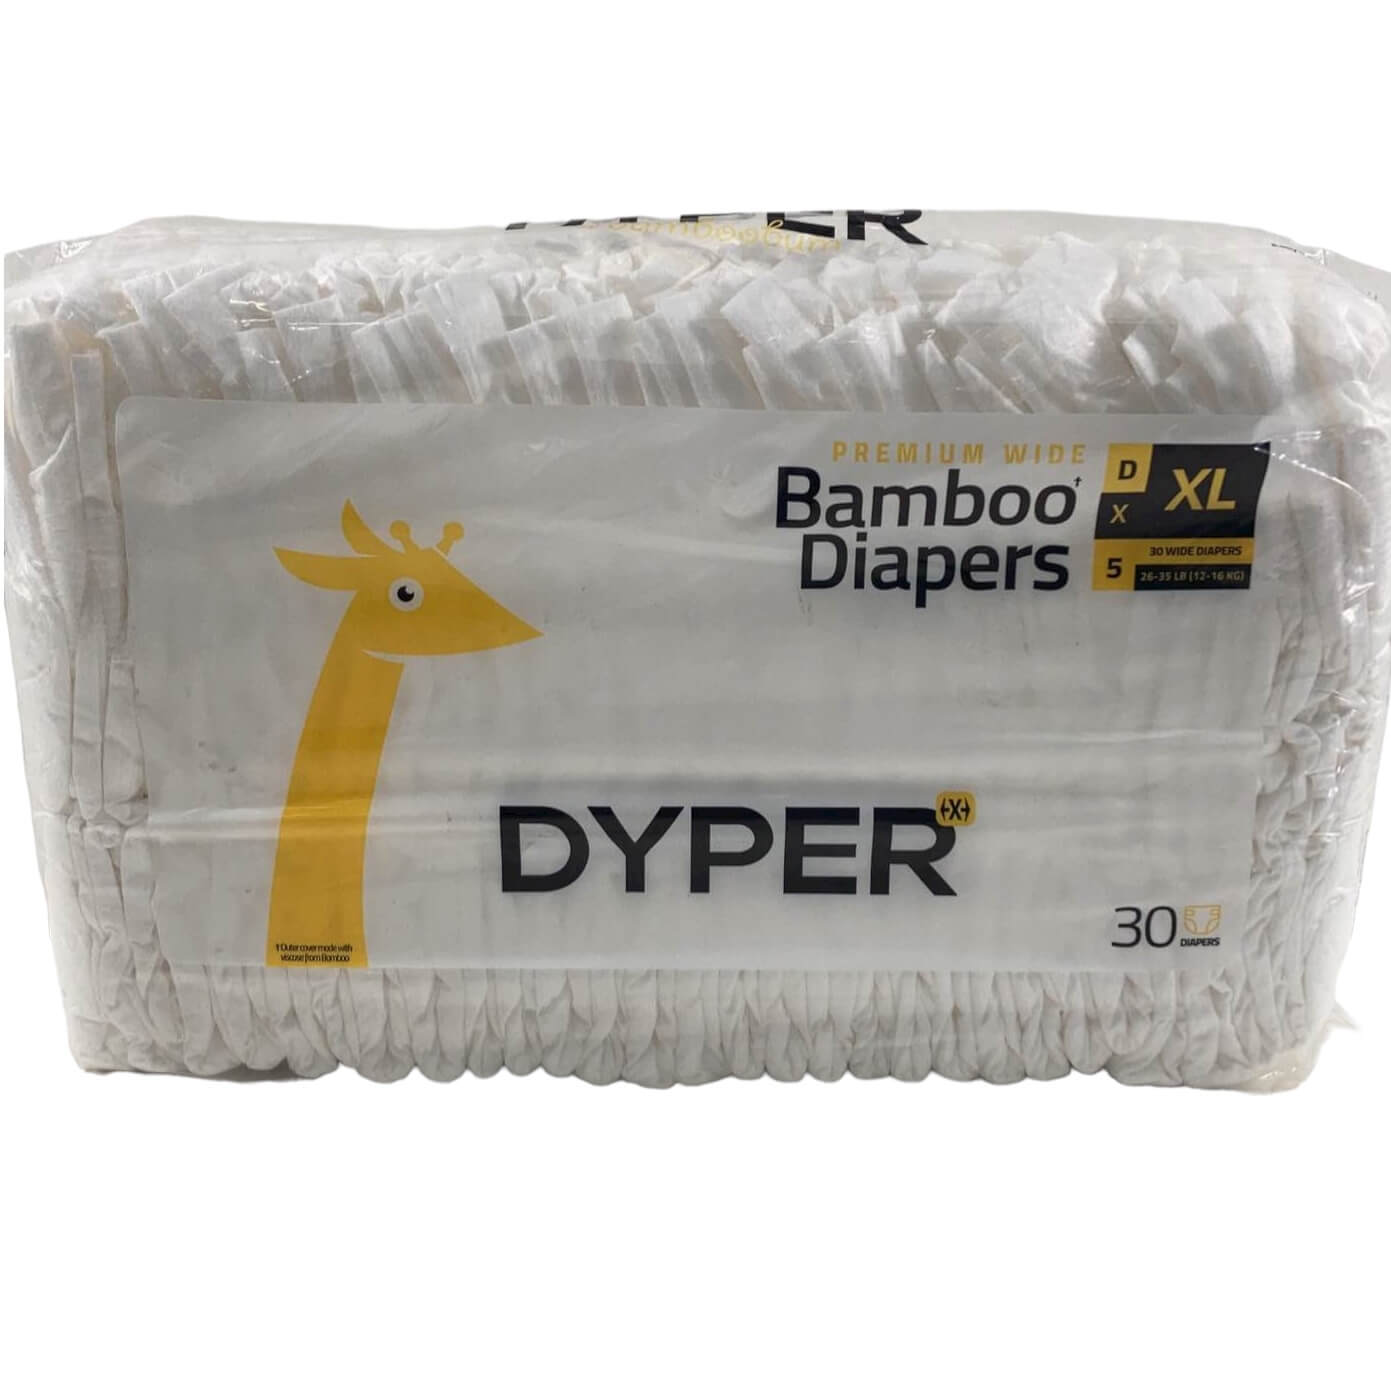 a package of DYPER bamboo disposable diapers 